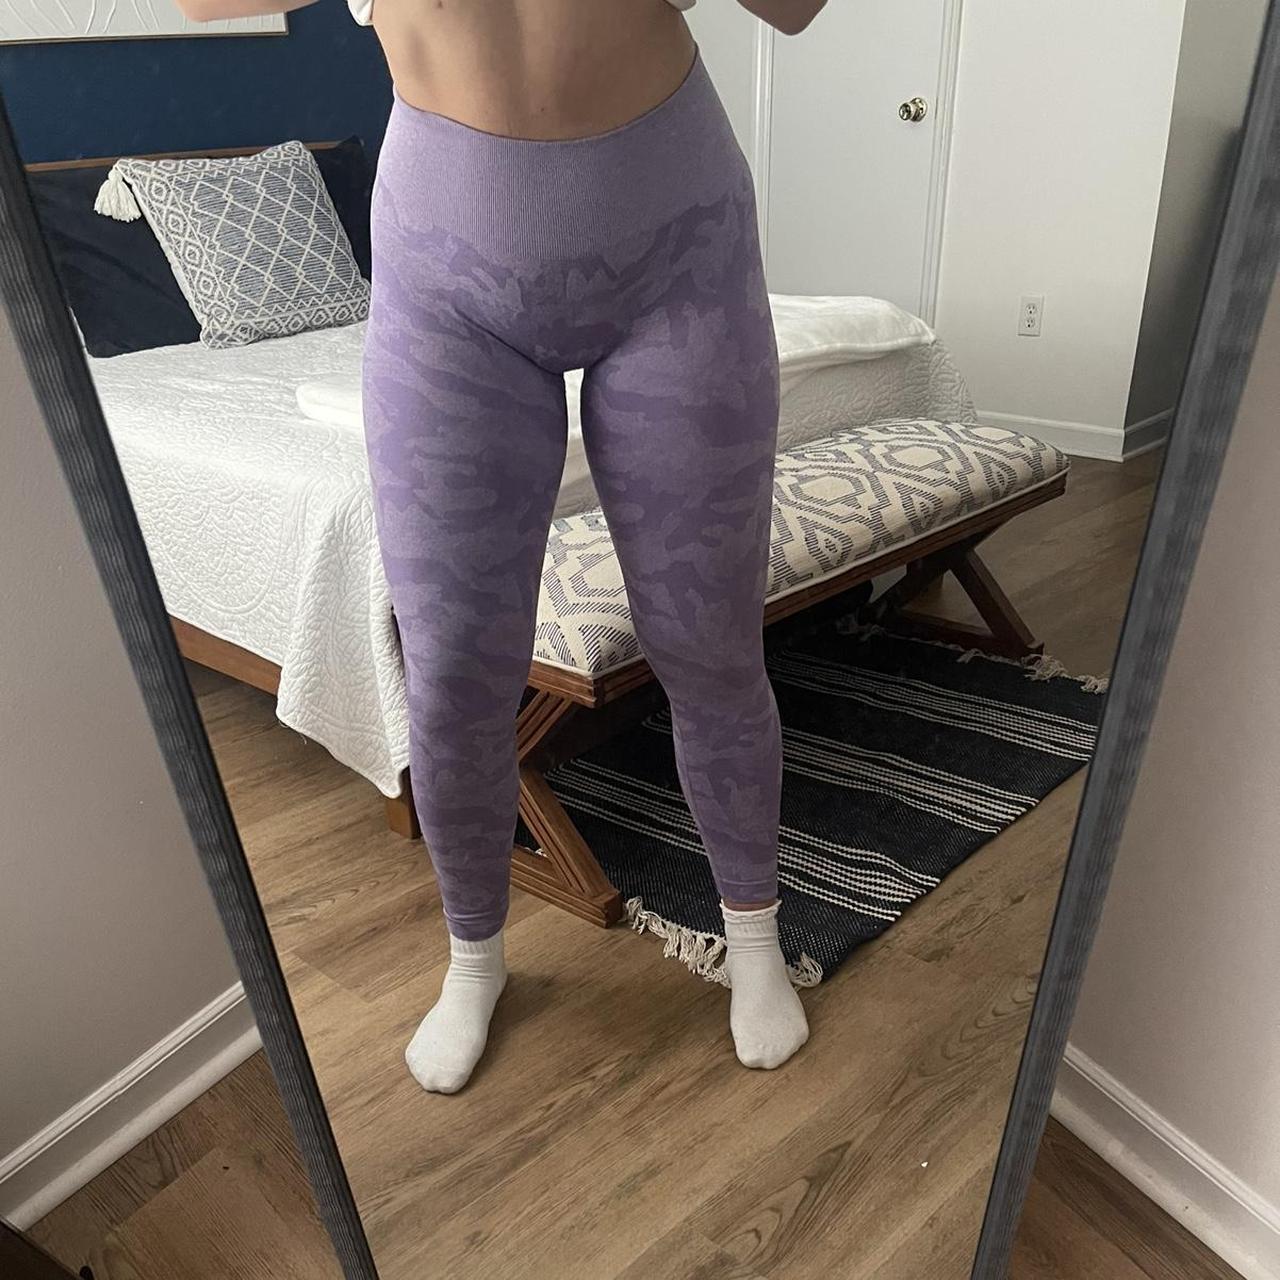 NVGTN leggings, size small in lilac